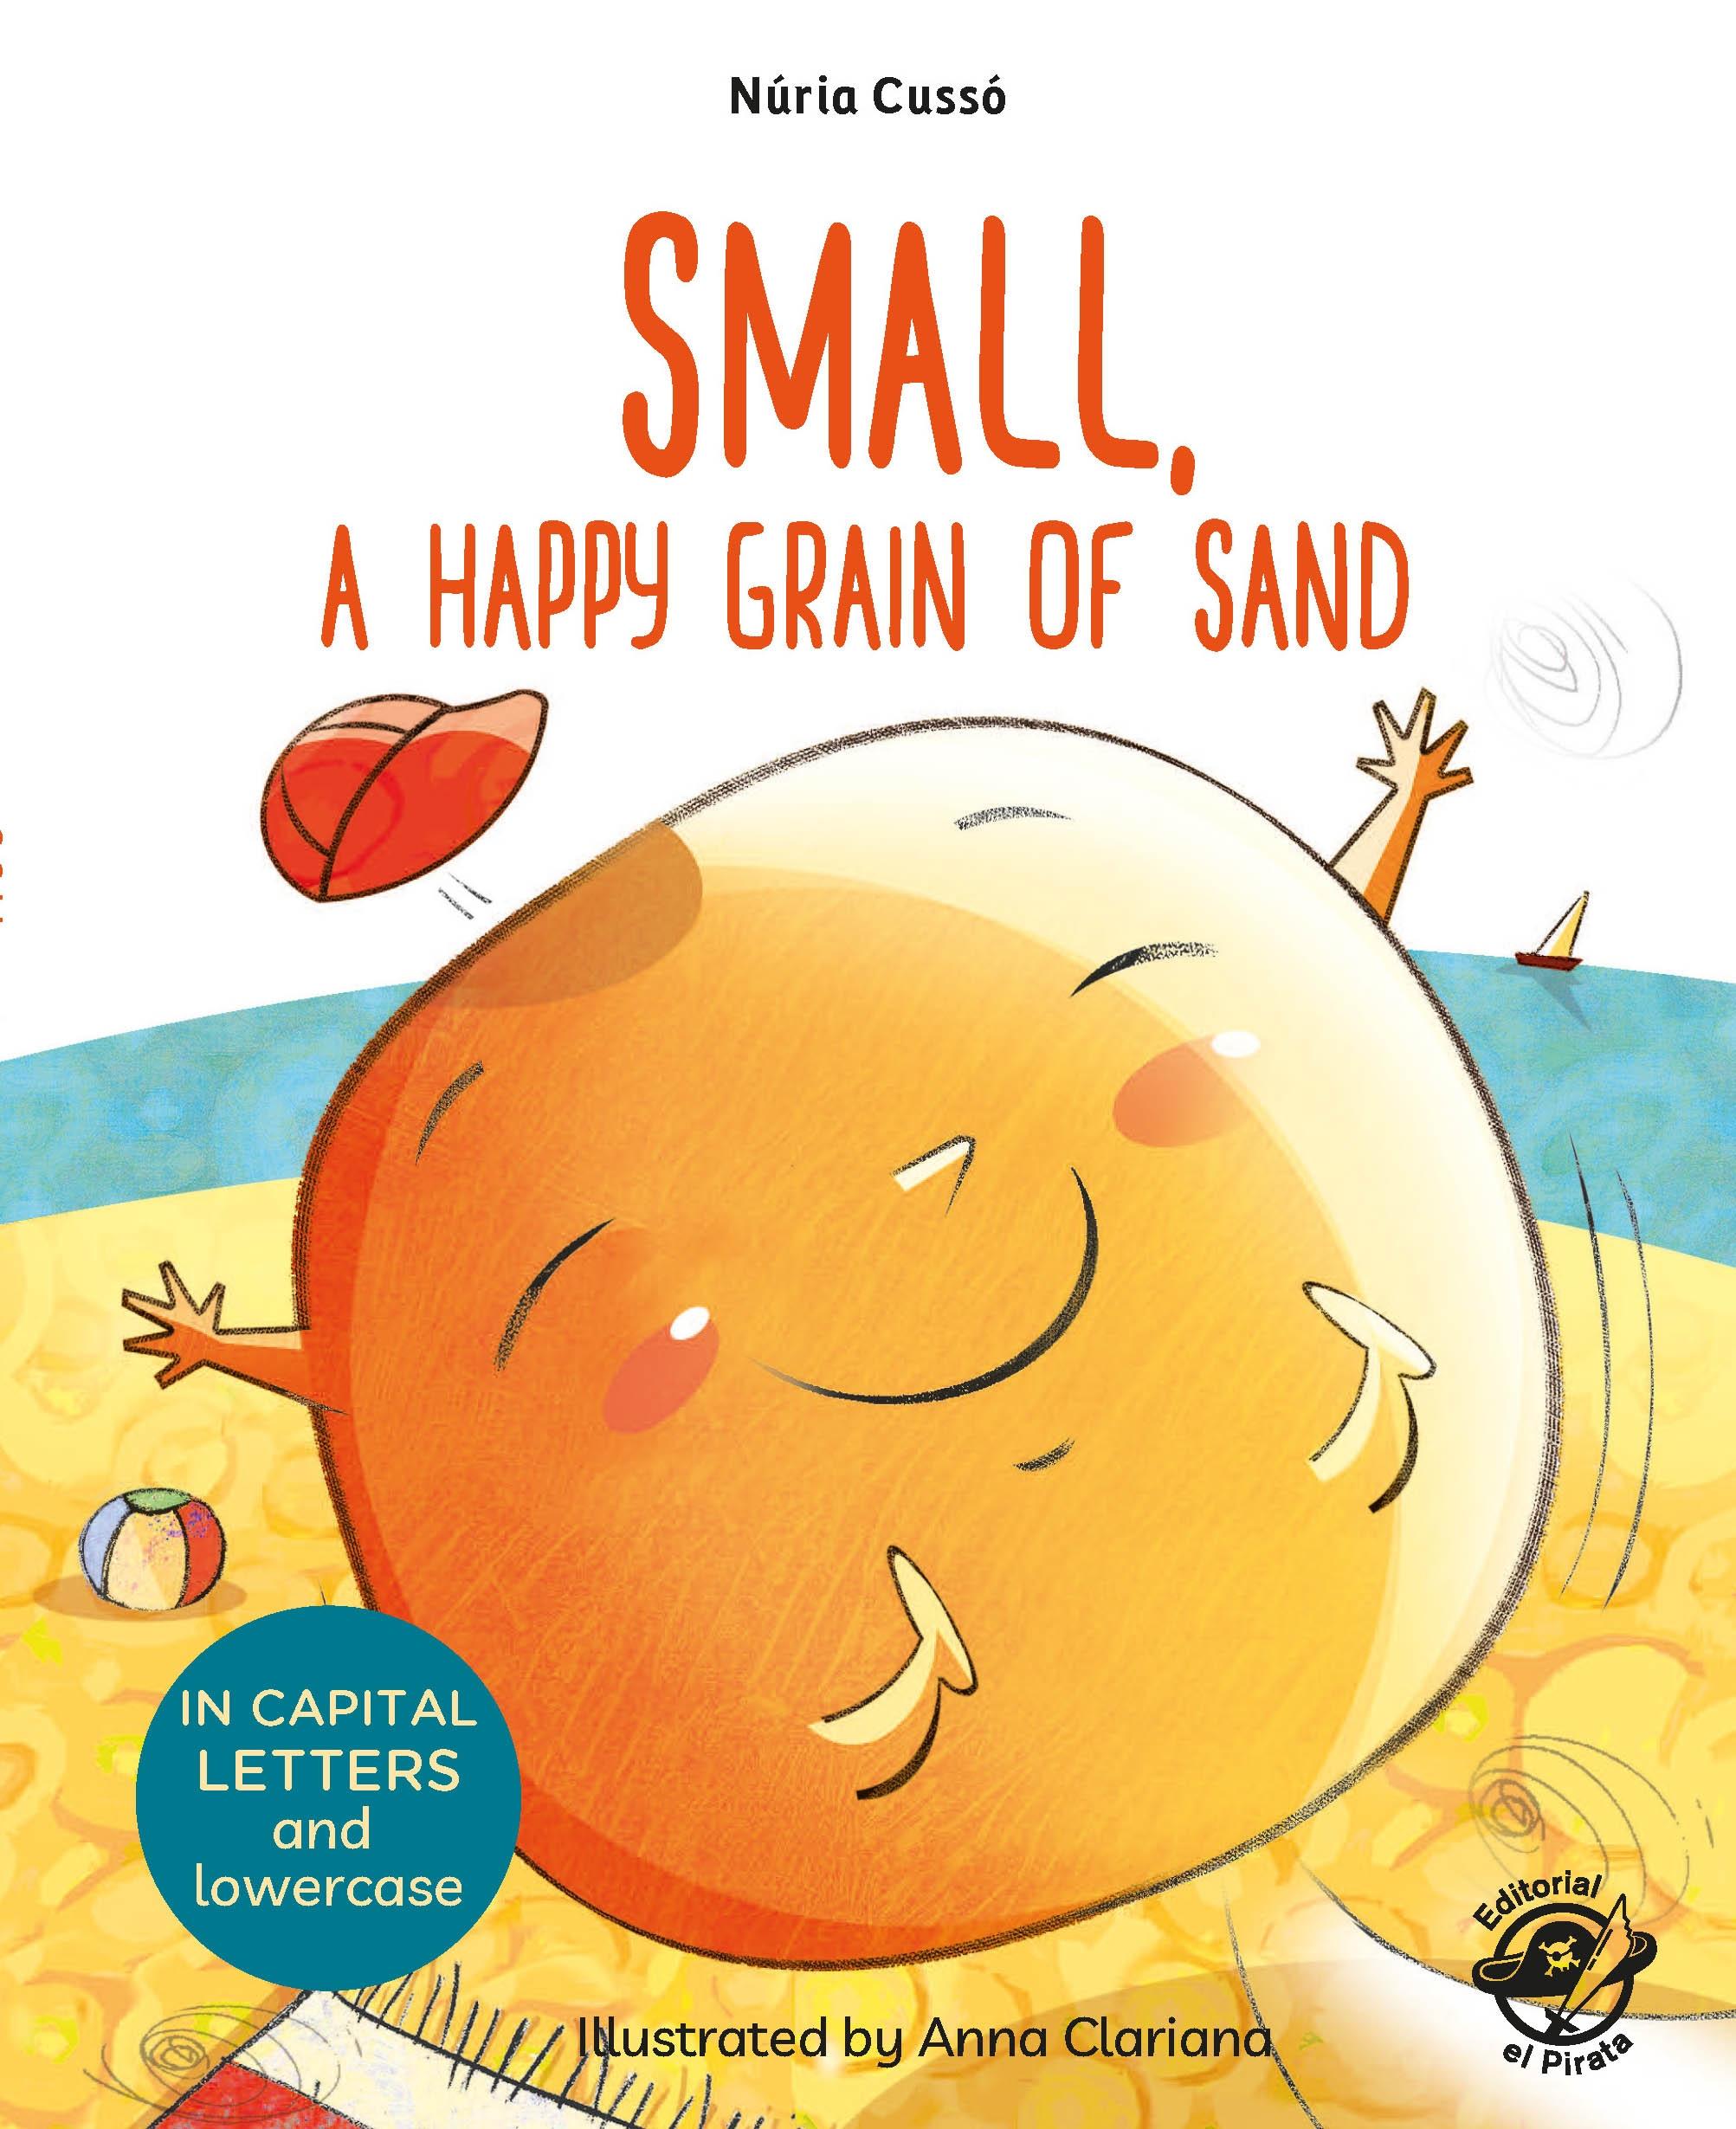 Small, a Happy Grain of Sand "English Children's Books - Learn to Read in CAPITAL Letters and Lowercas". 